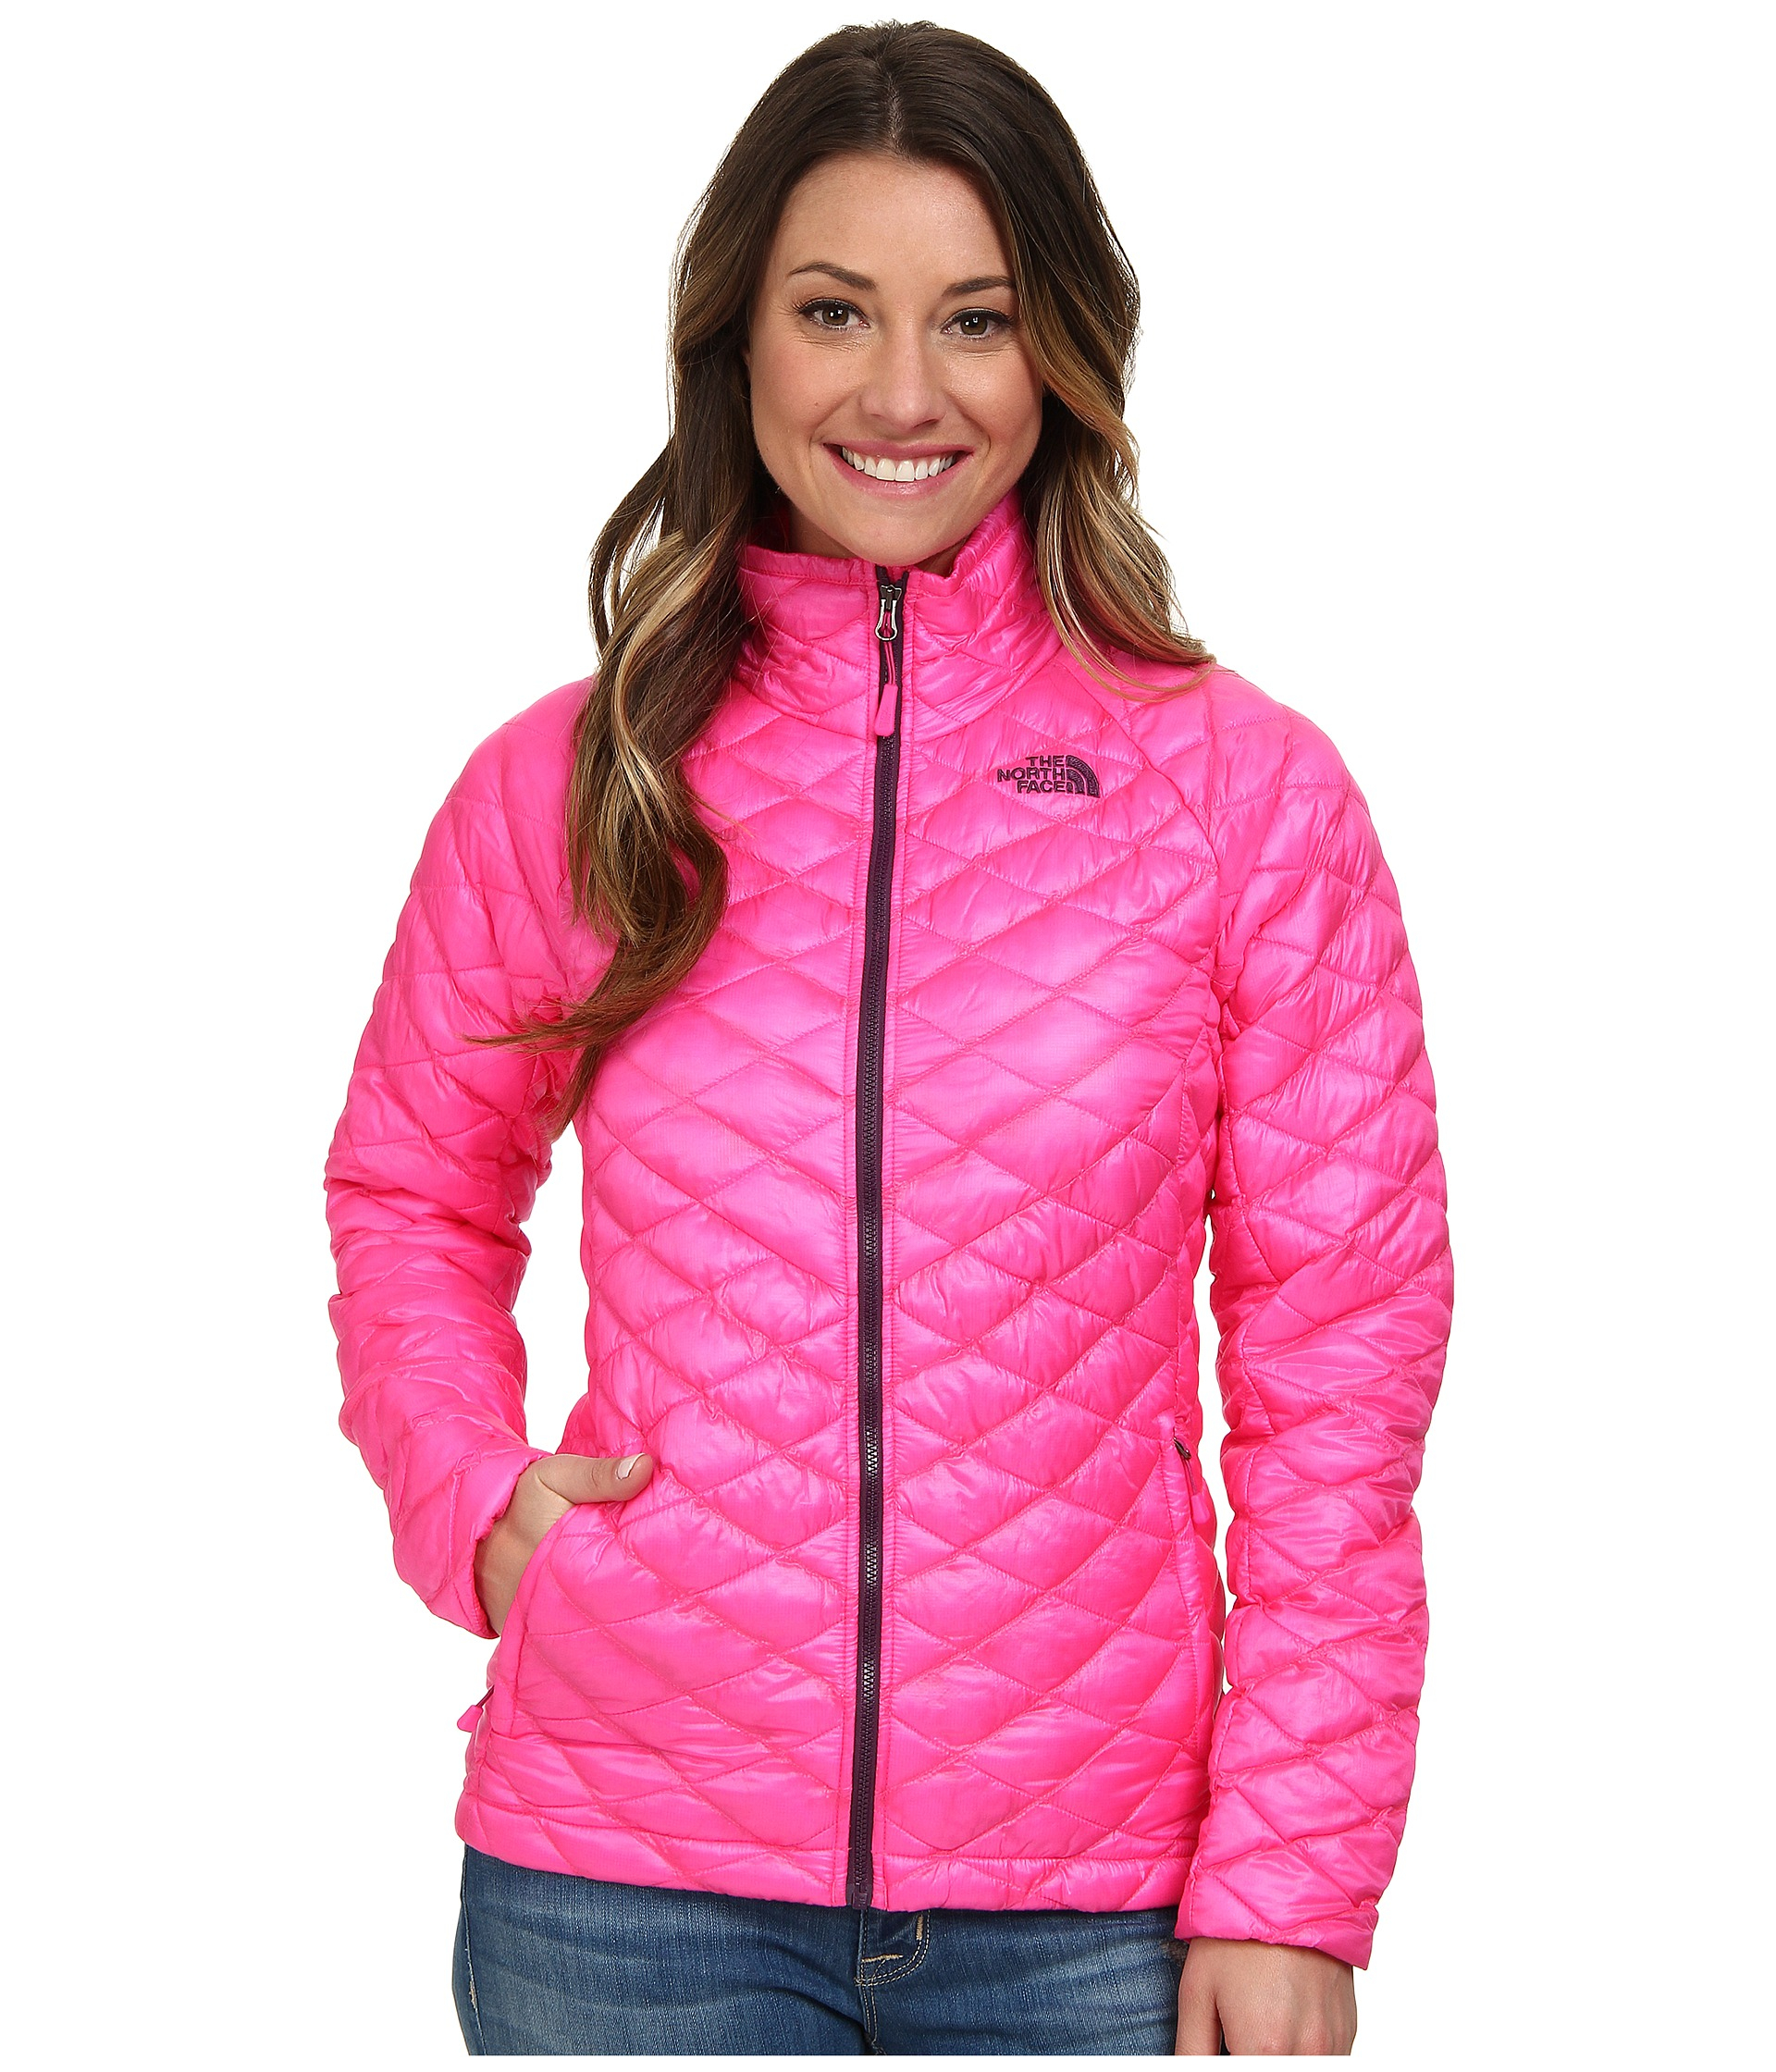 Lyst - The North Face Thermoball™ Full Zip Jacket in Pink